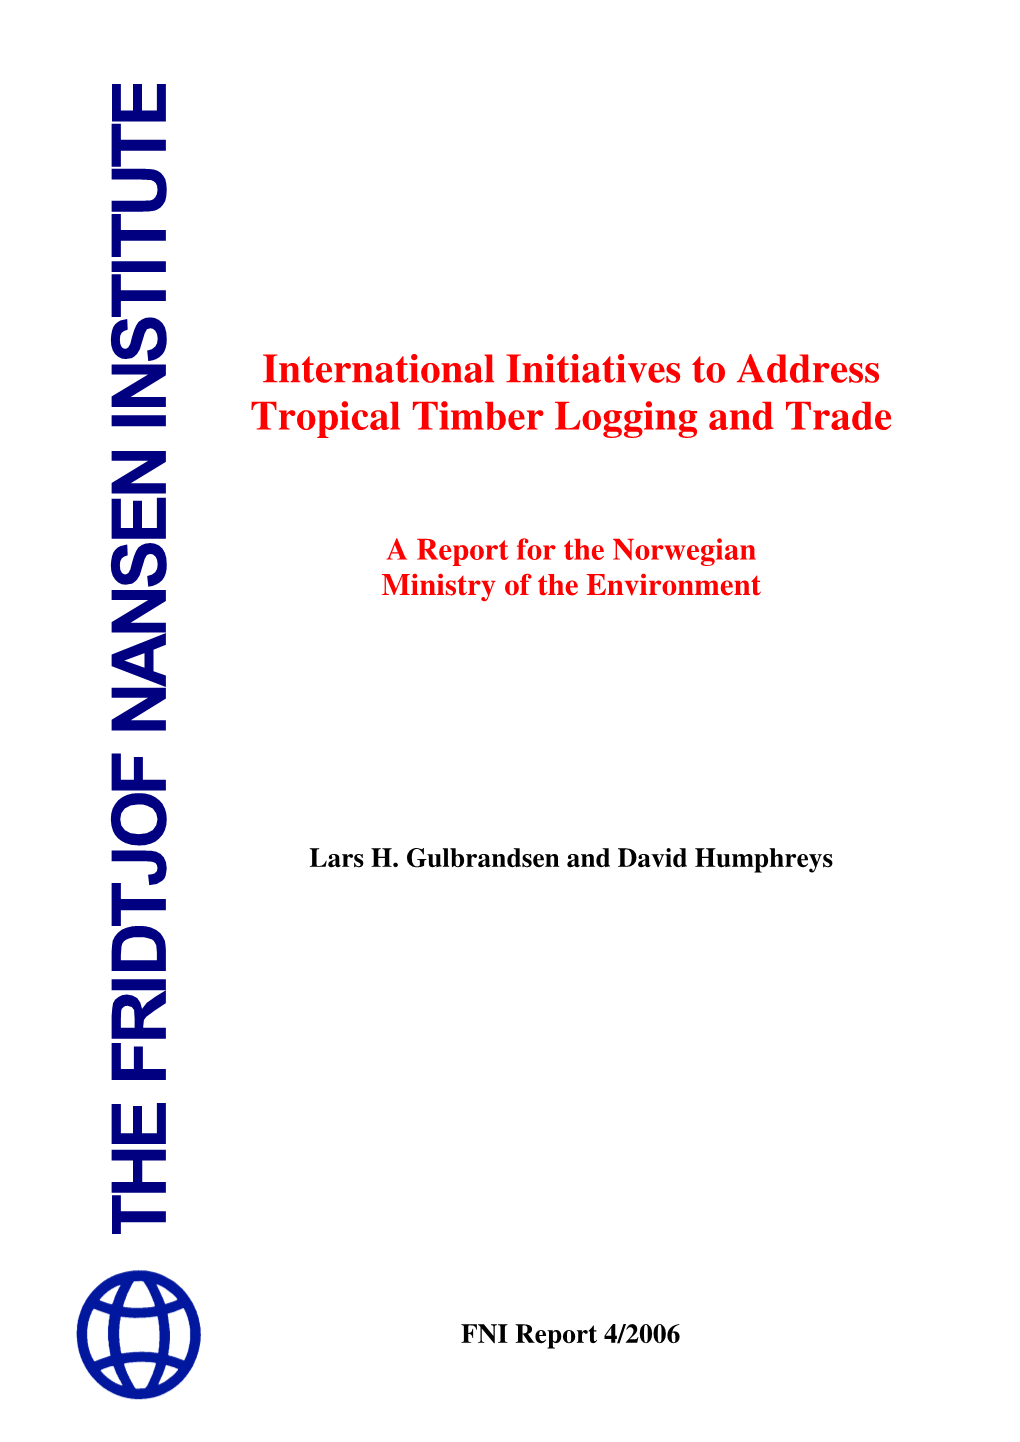 International Initiatives to Address Tropical Timber Logging and Trade